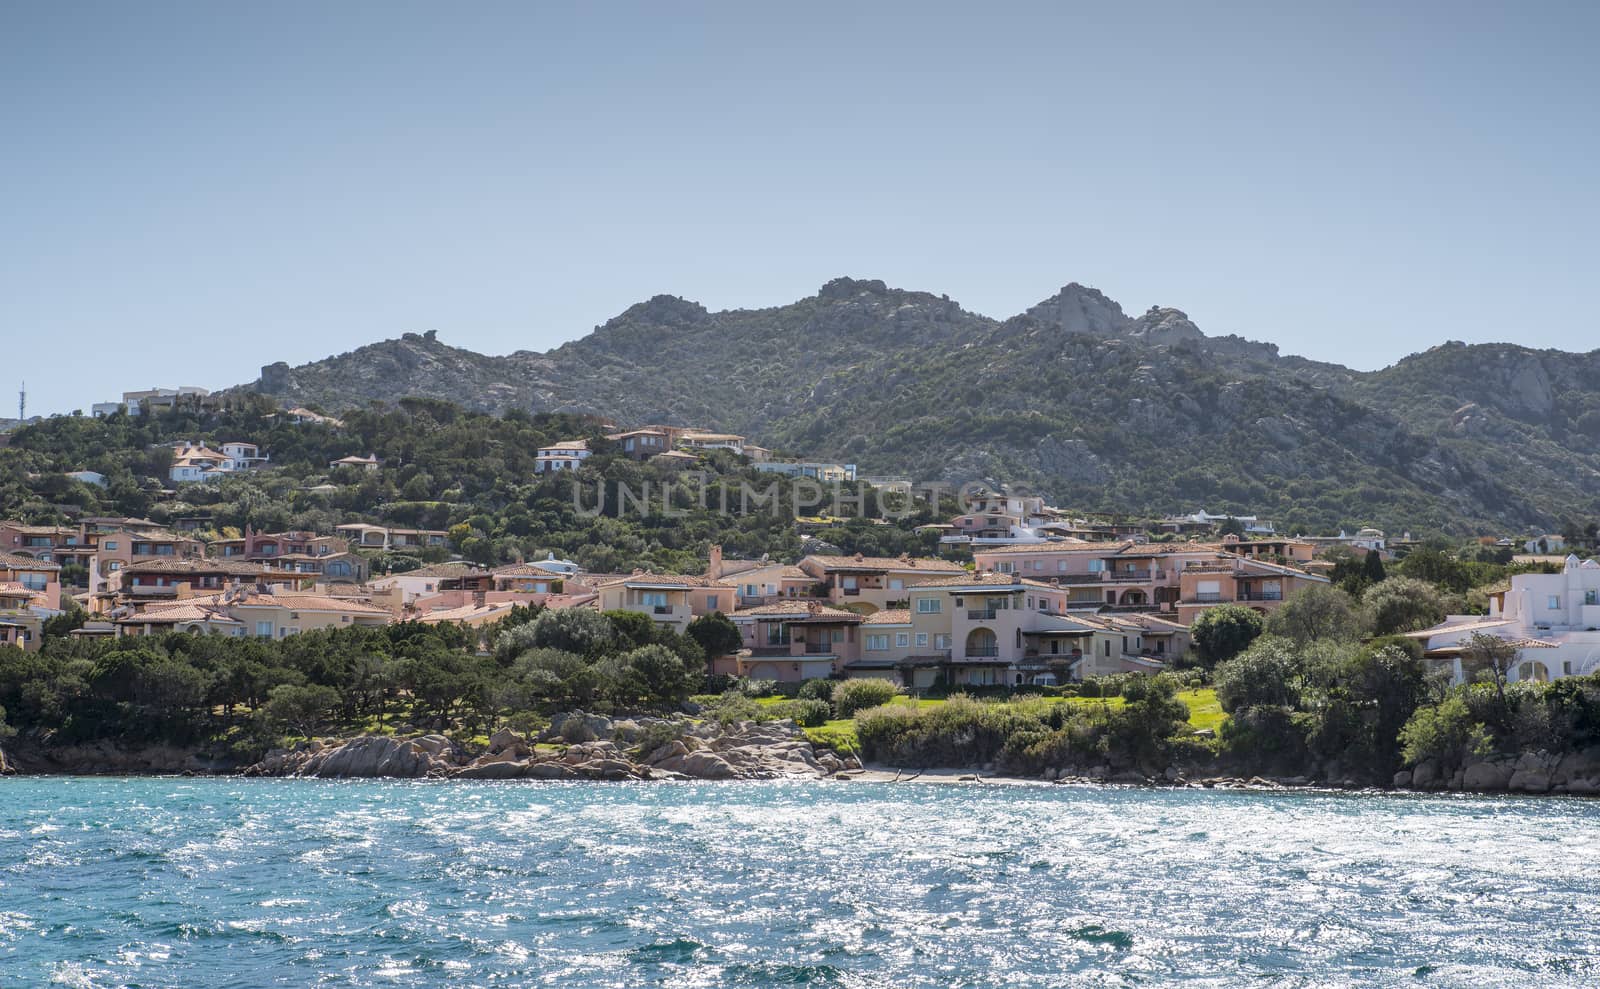 skyline of ht exclusive village of porto servo on sradinia island italy with the mountains as background and the blue water in the sea as foreground.